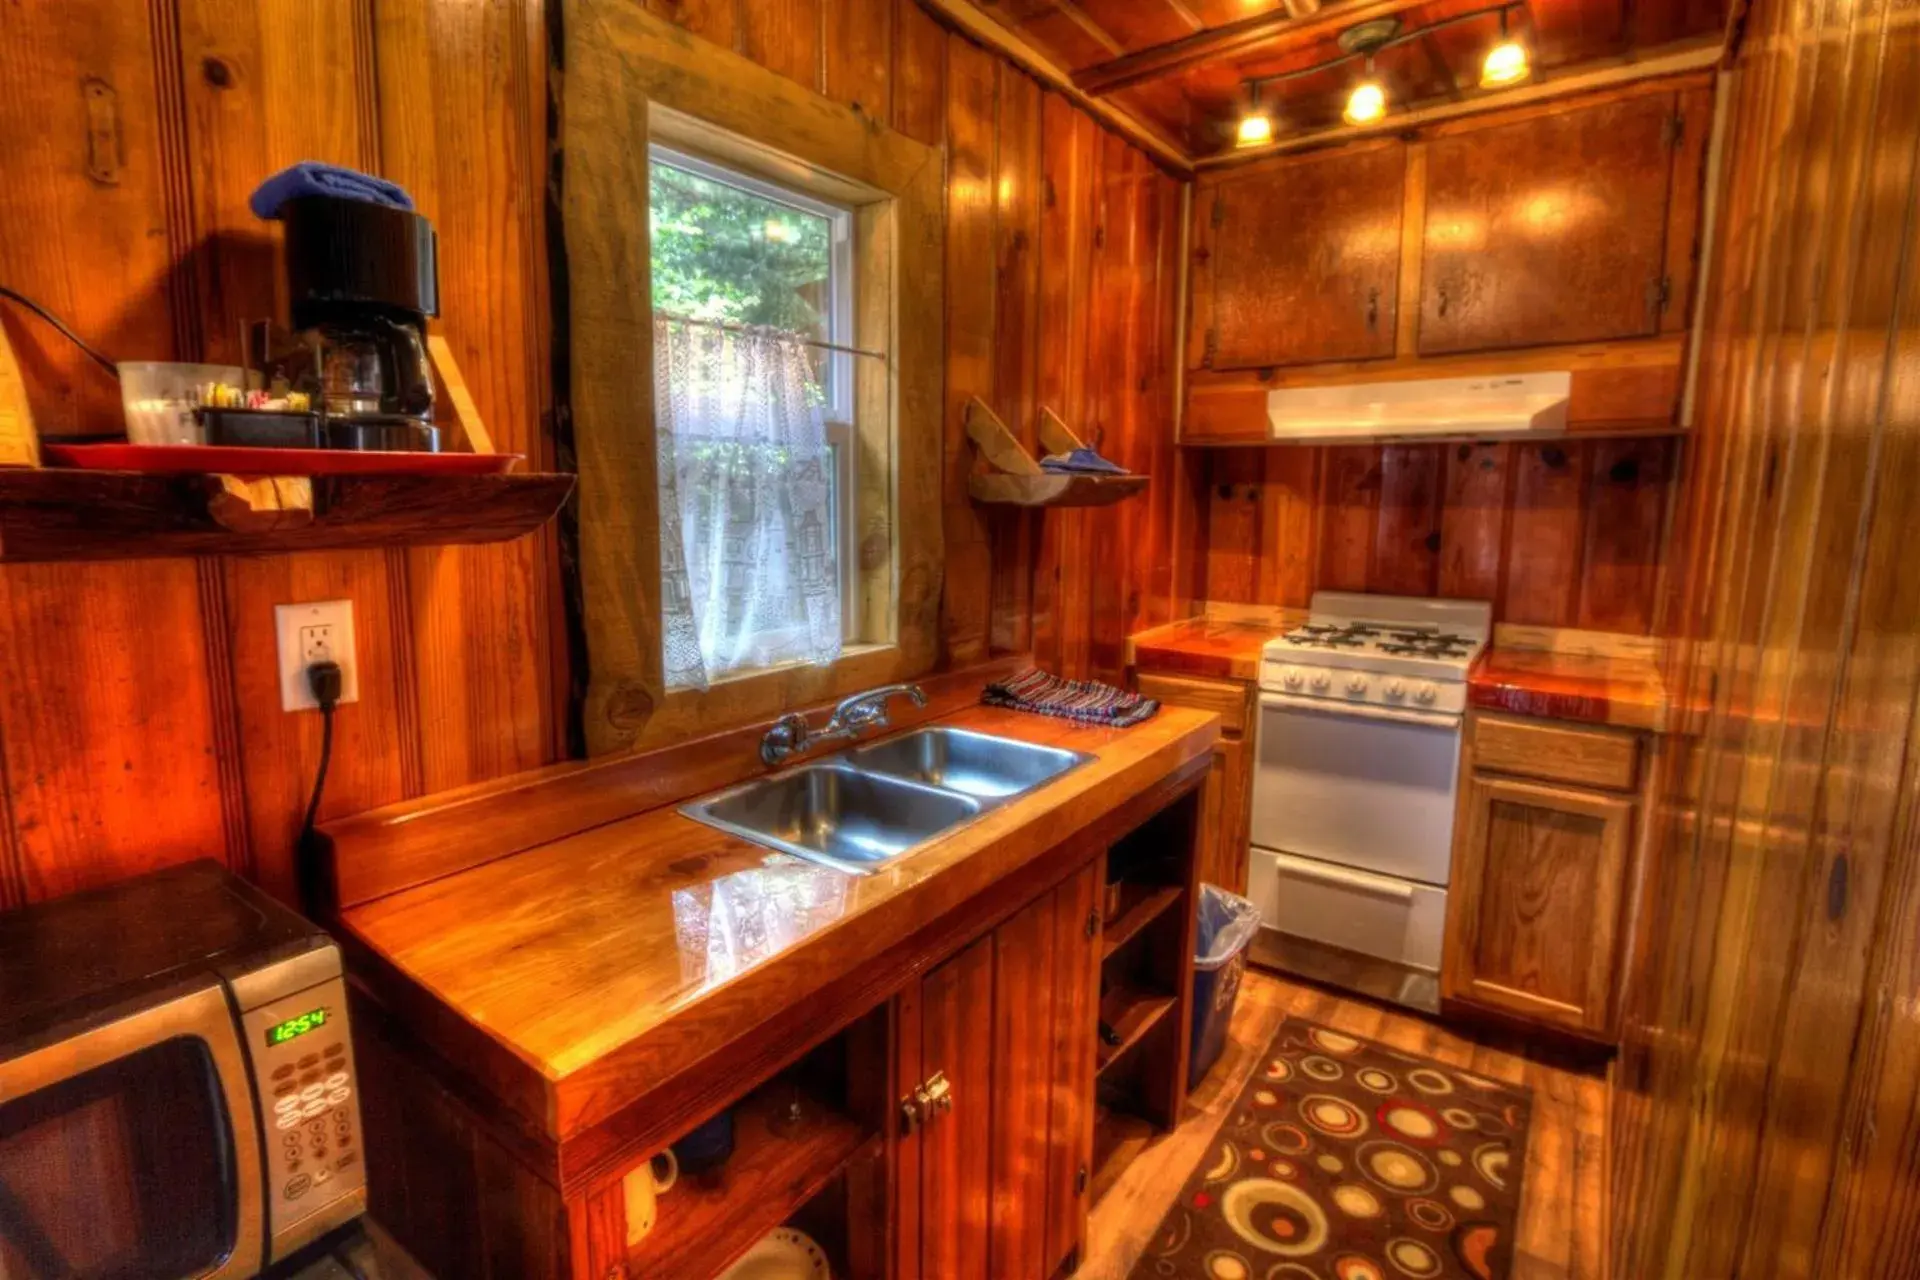 Kitchen or kitchenette, Kitchen/Kitchenette in Sleepy Hollow Cabins & Hotel